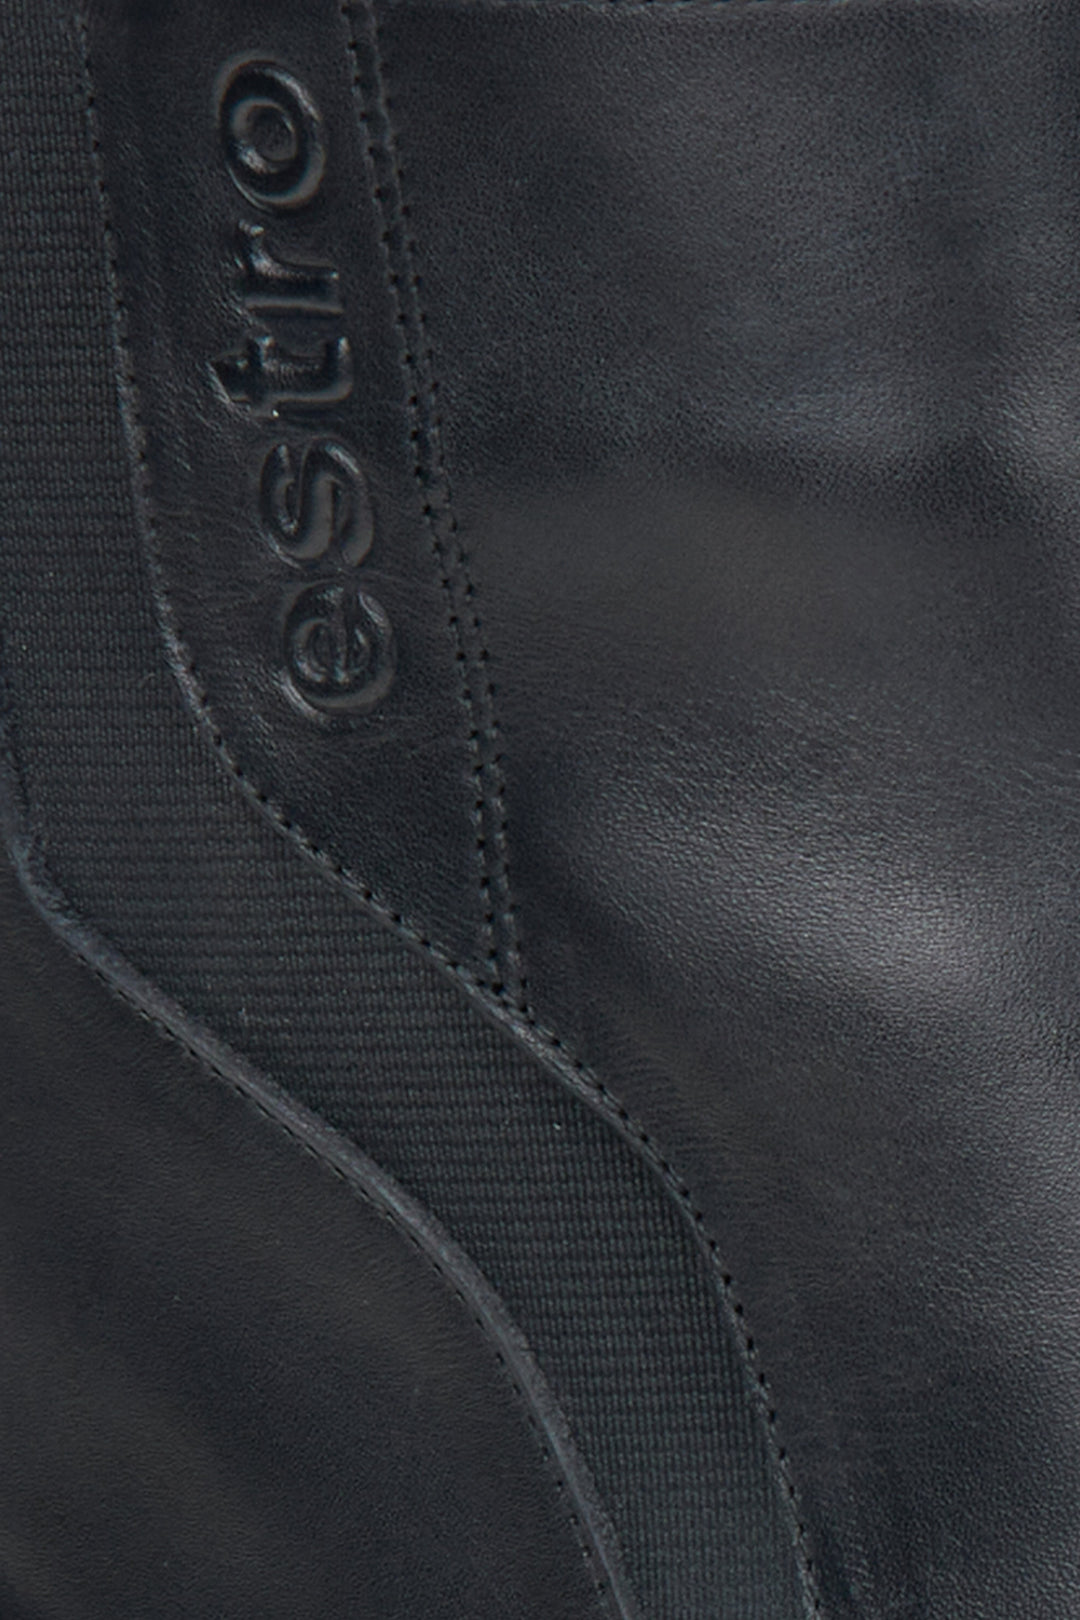 Women's black leaather ankle boots - a close-up on details.